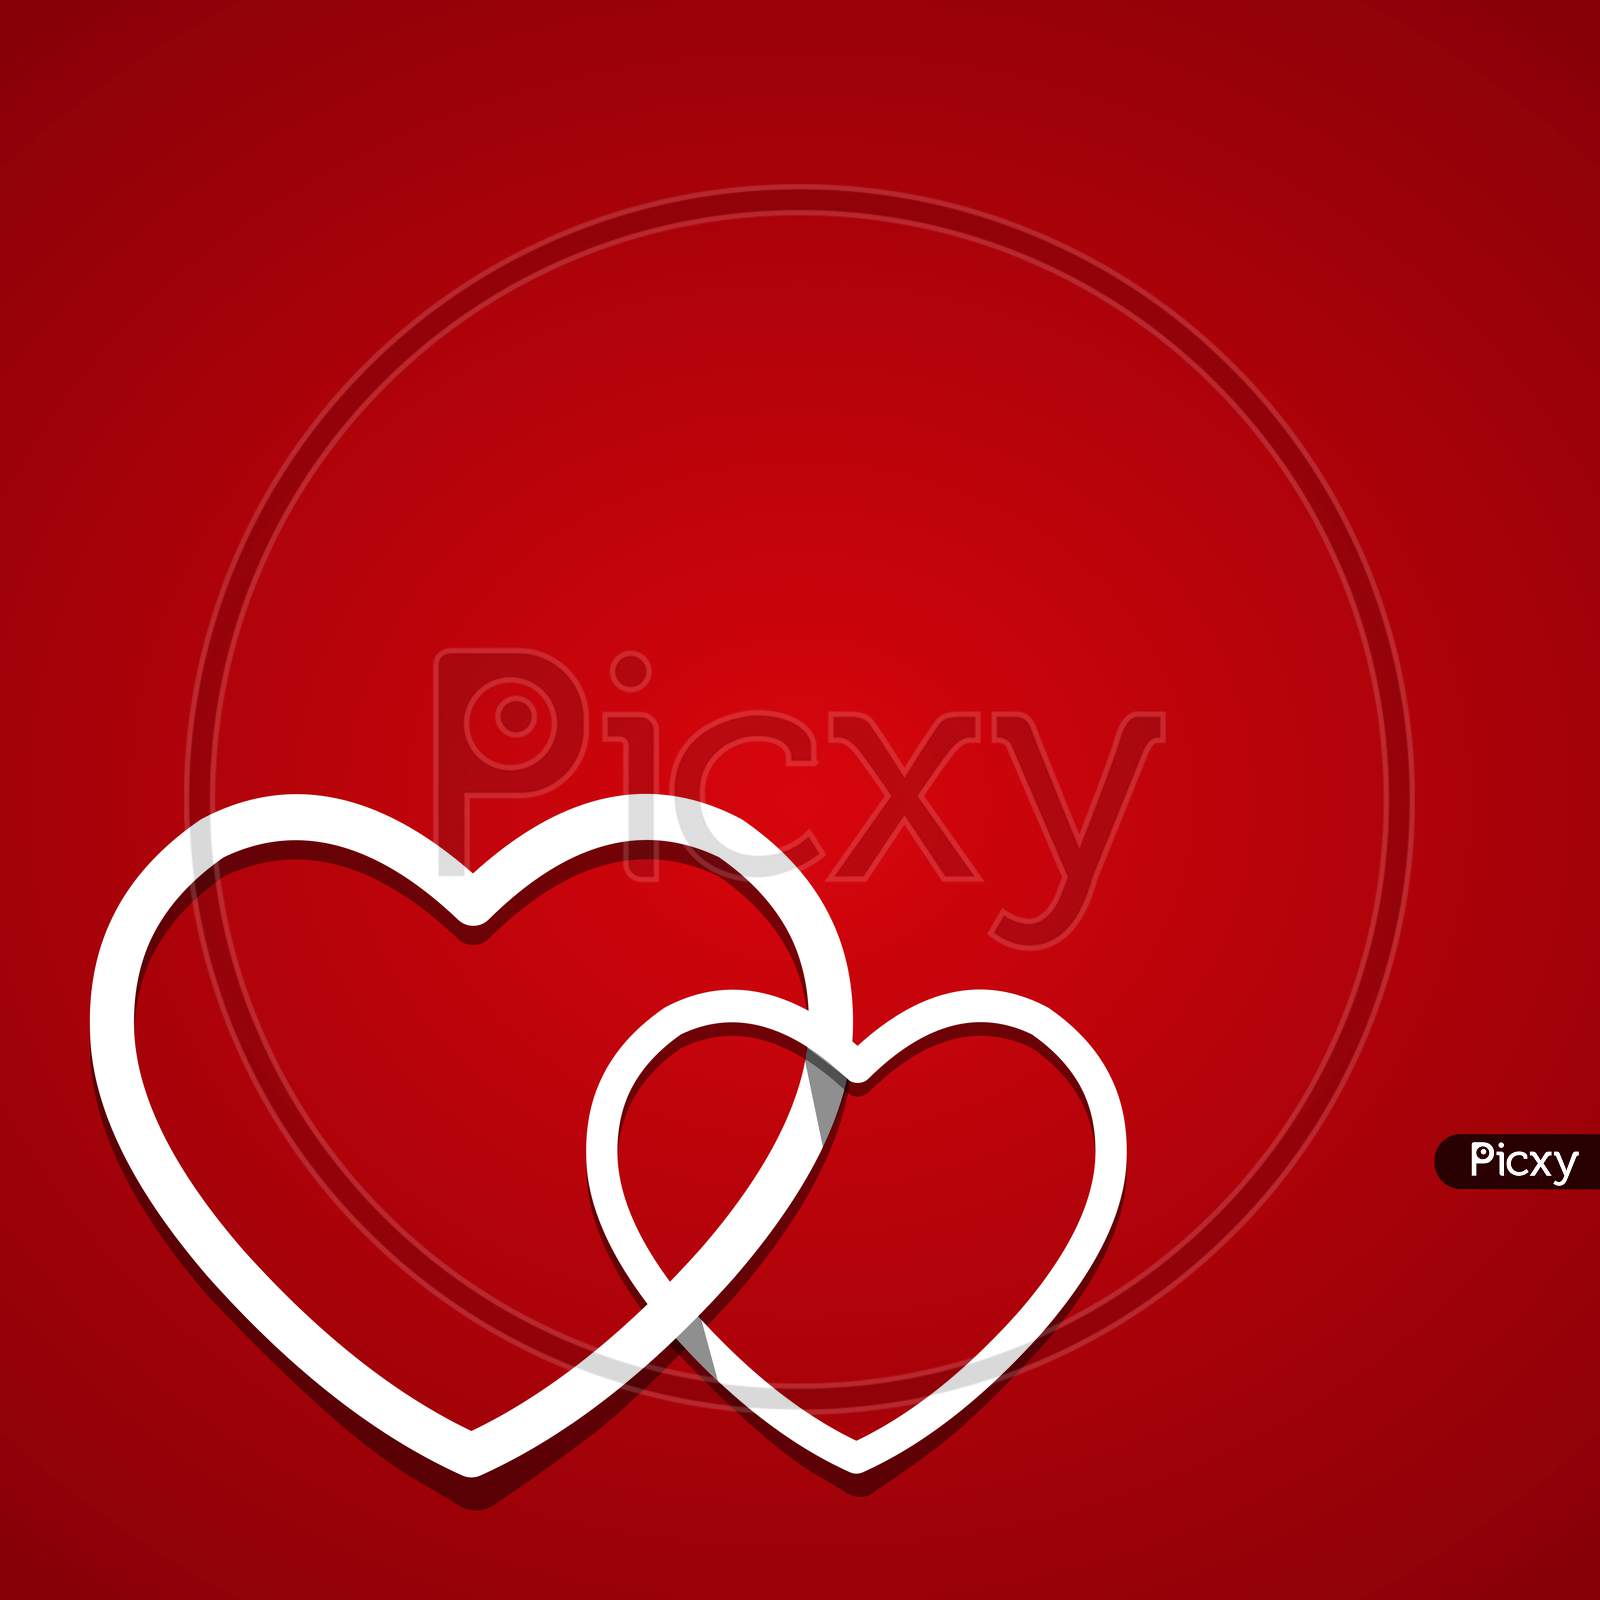 Abstract Valentines Day Background - Two Hearts